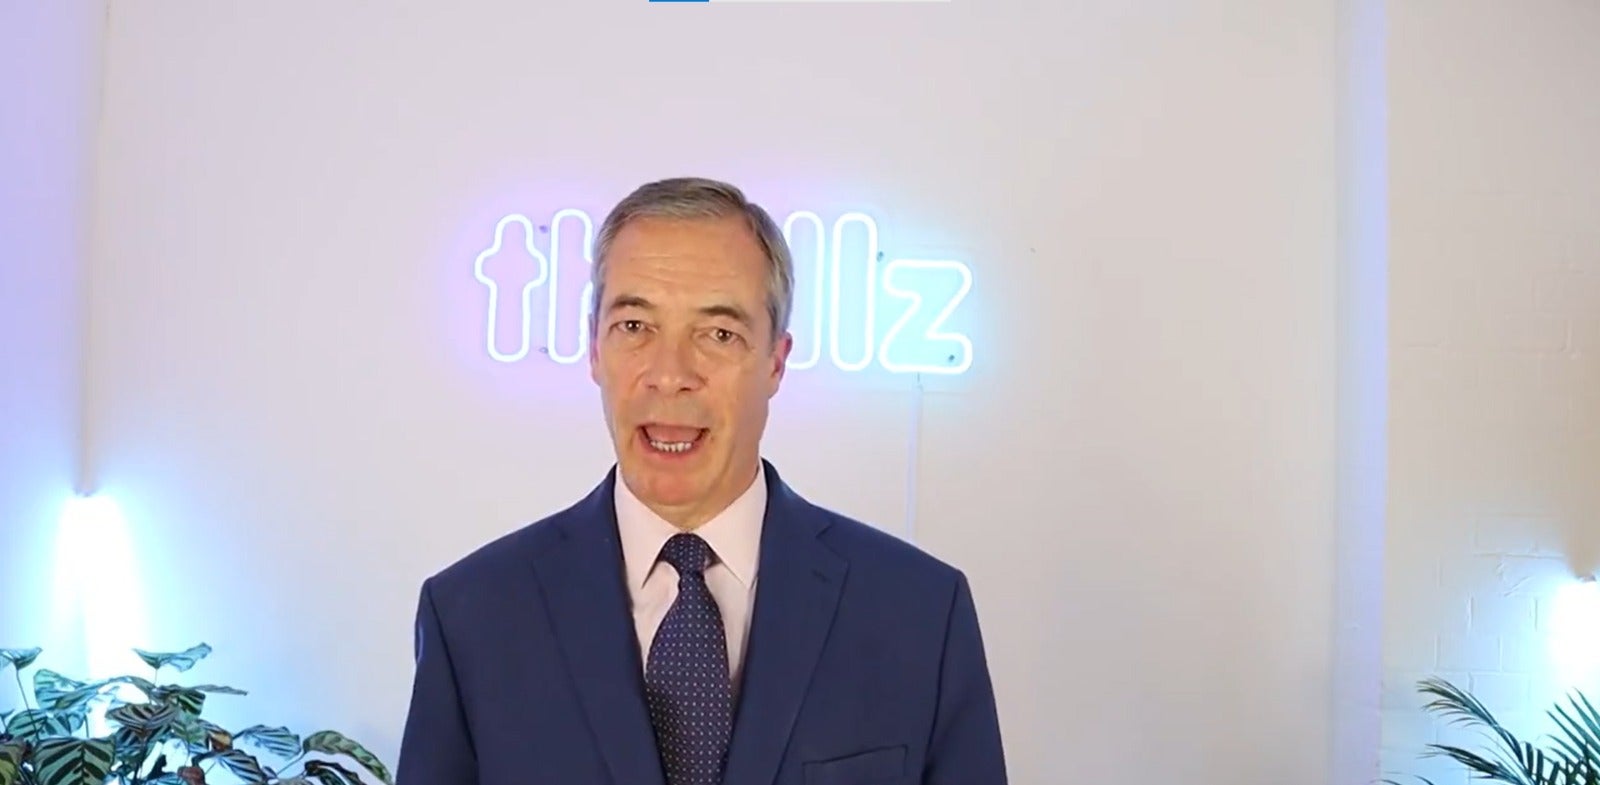 Nigel Farage roasts as he signs up for another ‘celebrity’Messaging service